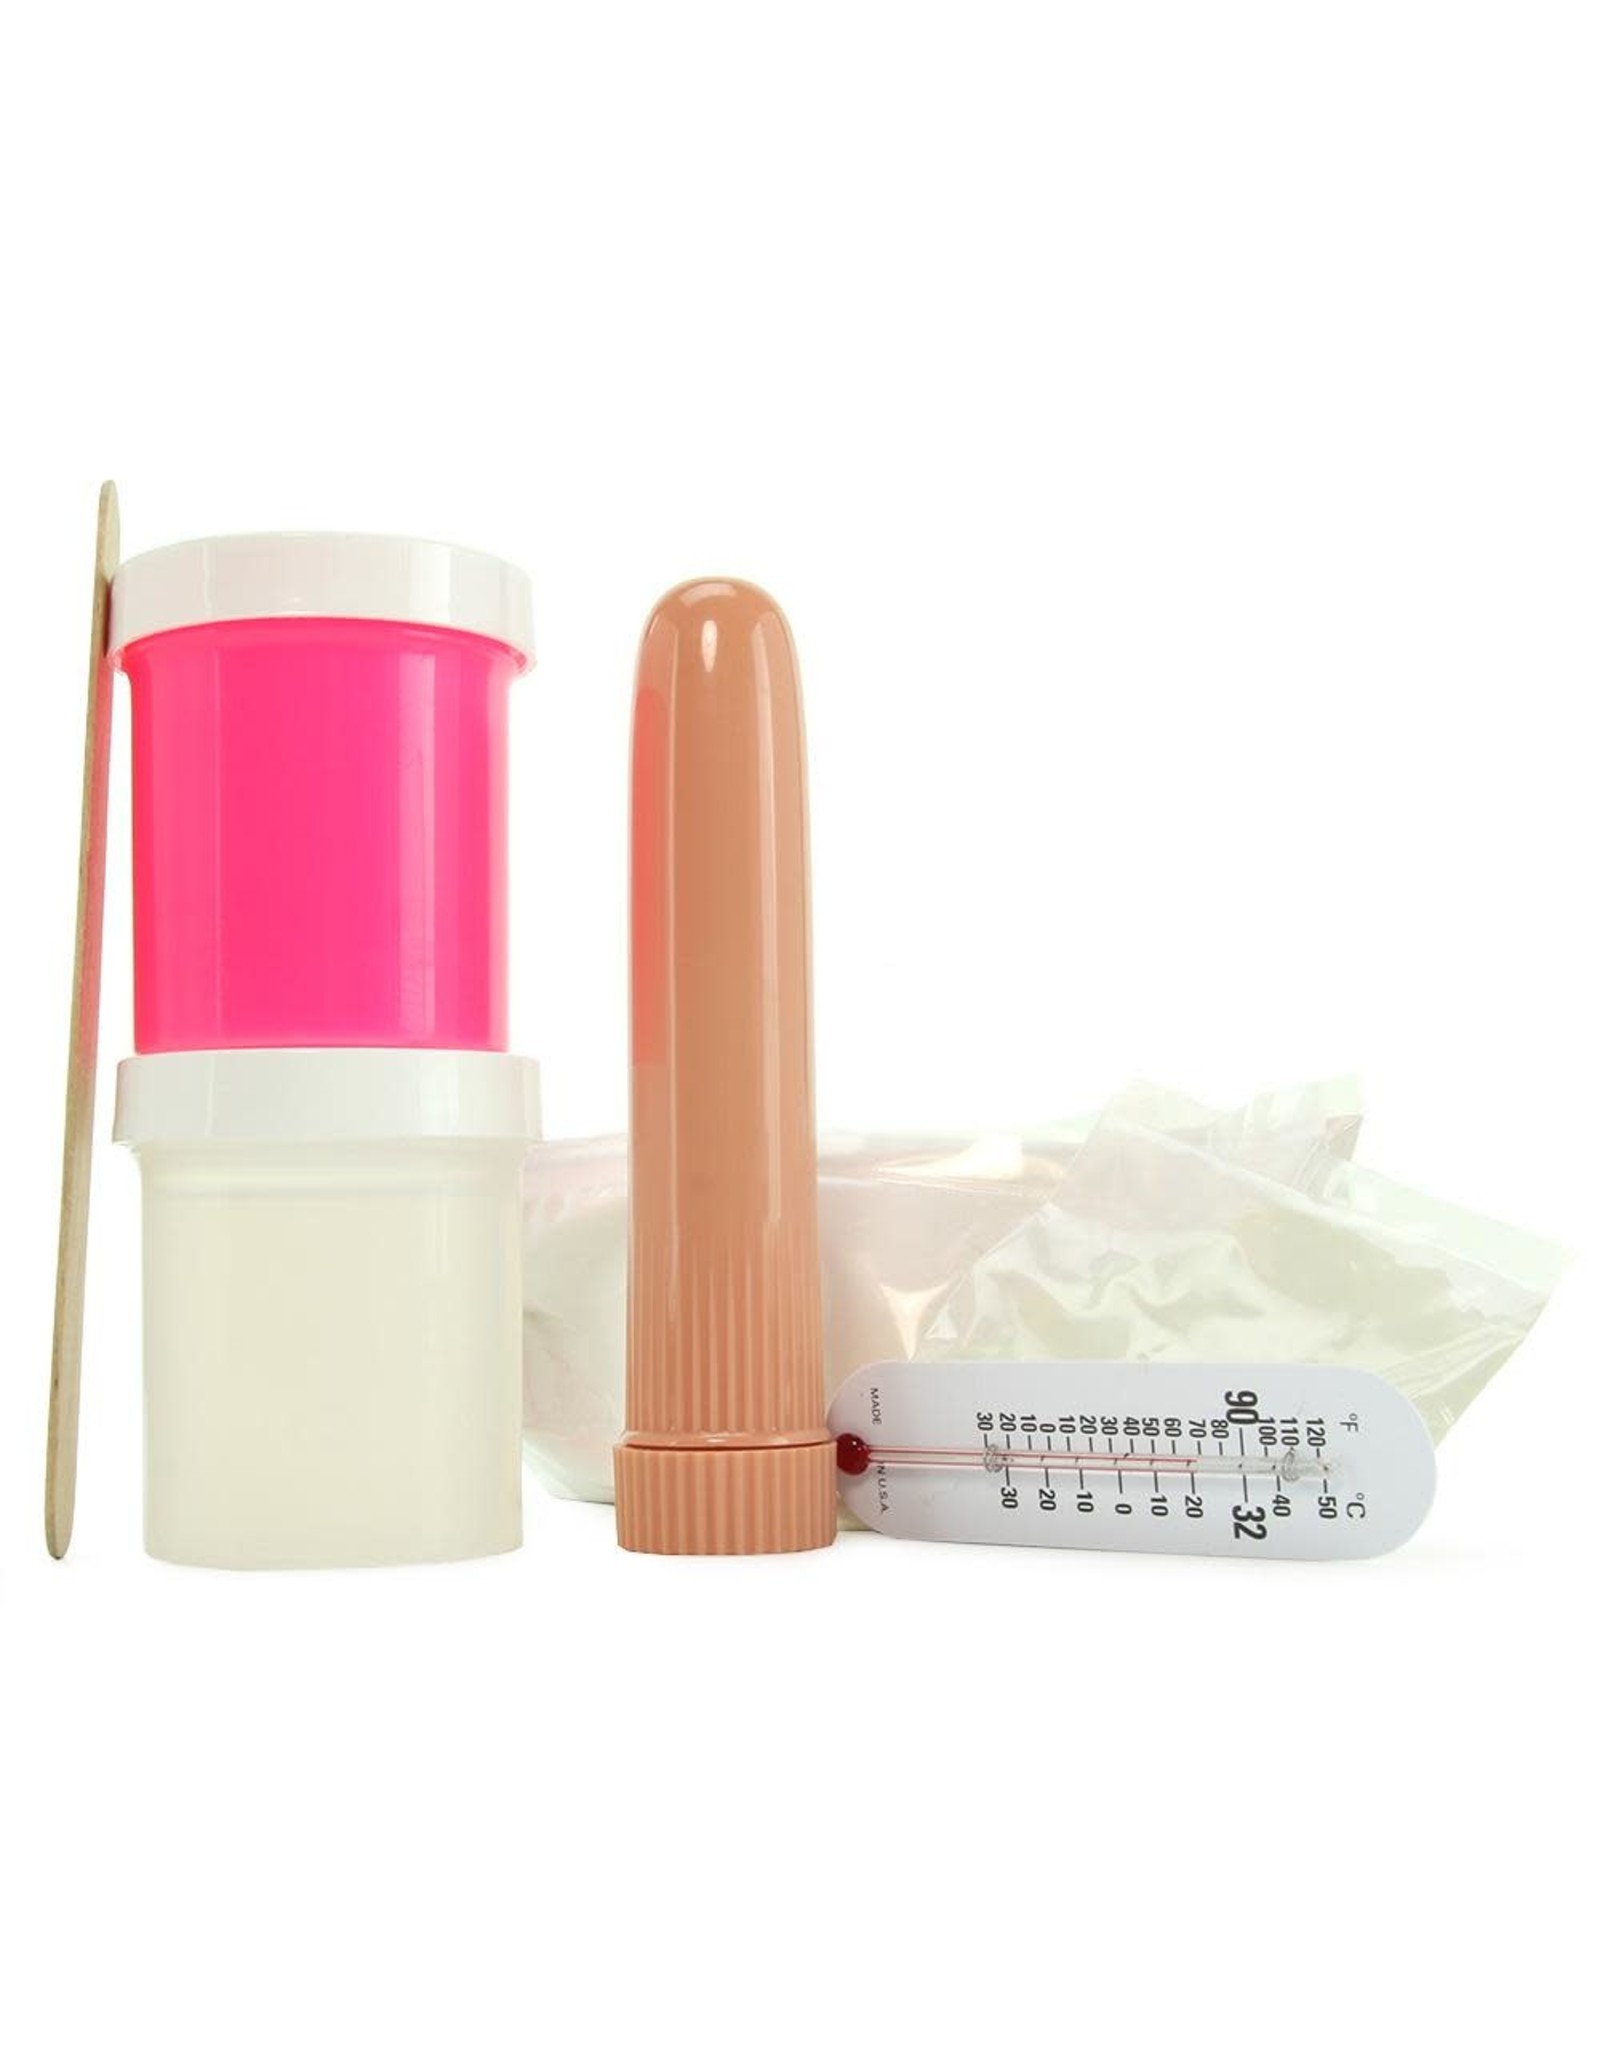 Empire Labs Clone-A-Willy - Glow in the Dark & Vibrating - Pink